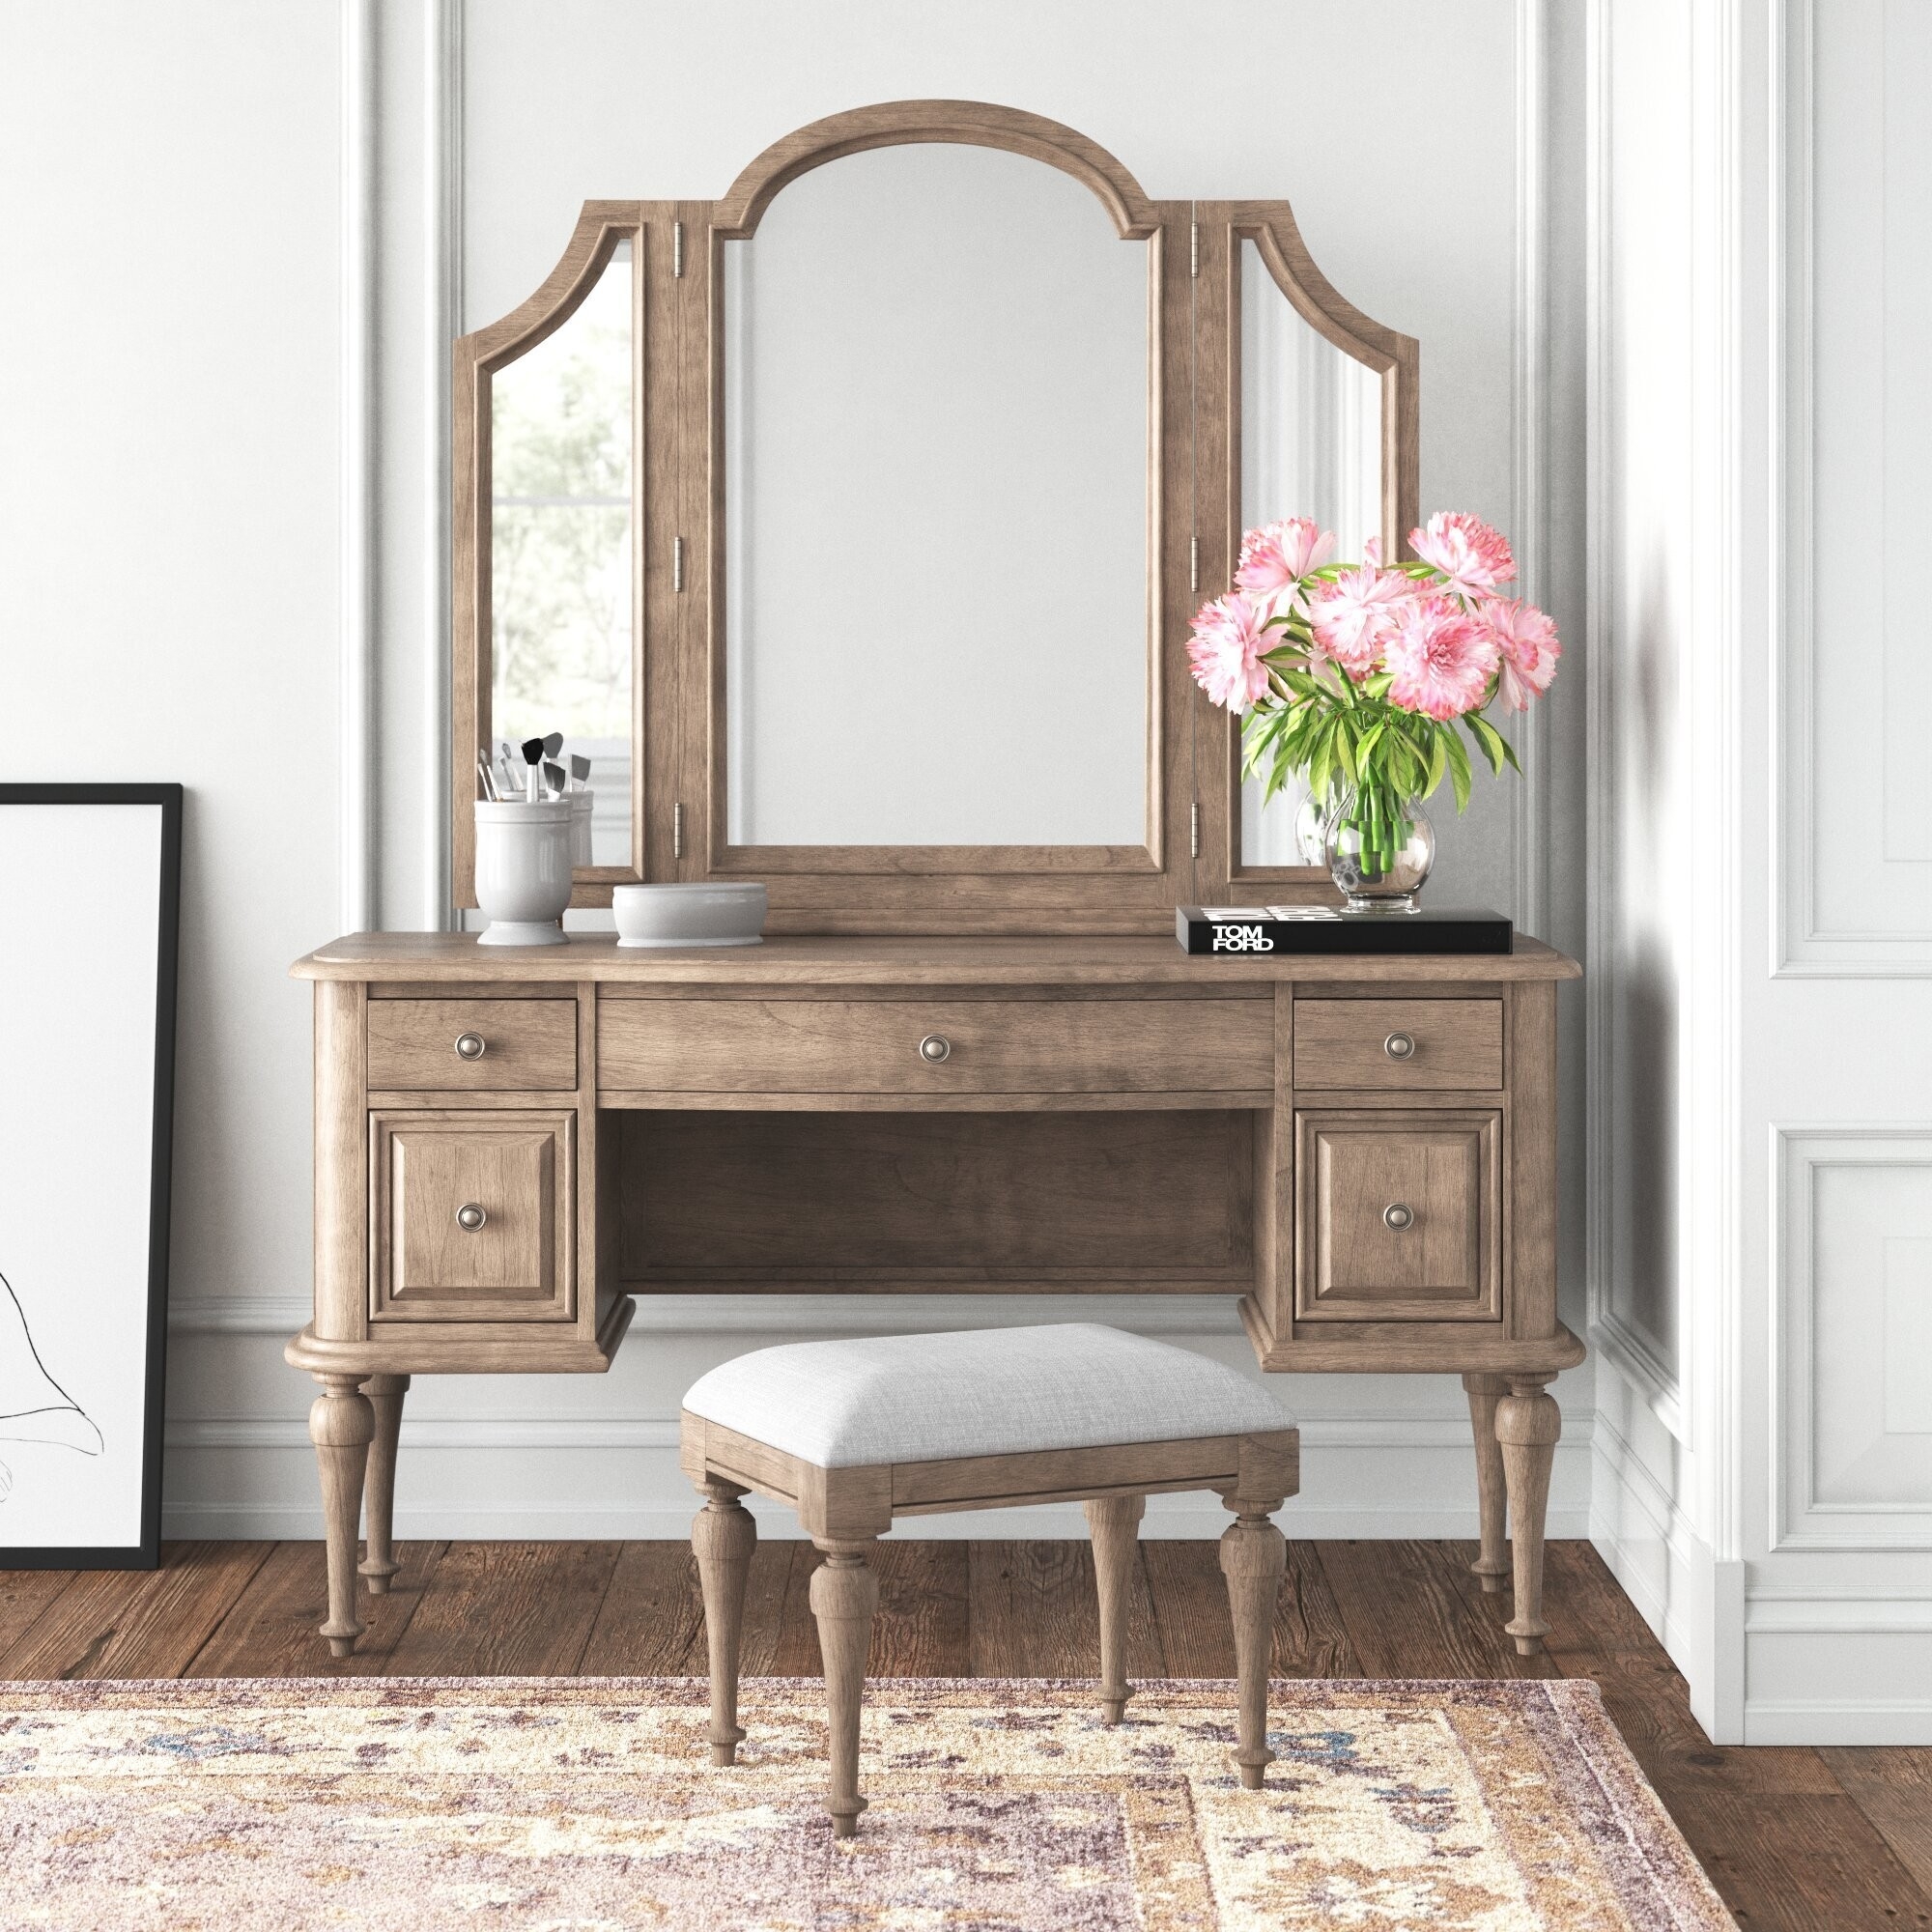 6 Essentials For The Ideal Vanity Area - Foter